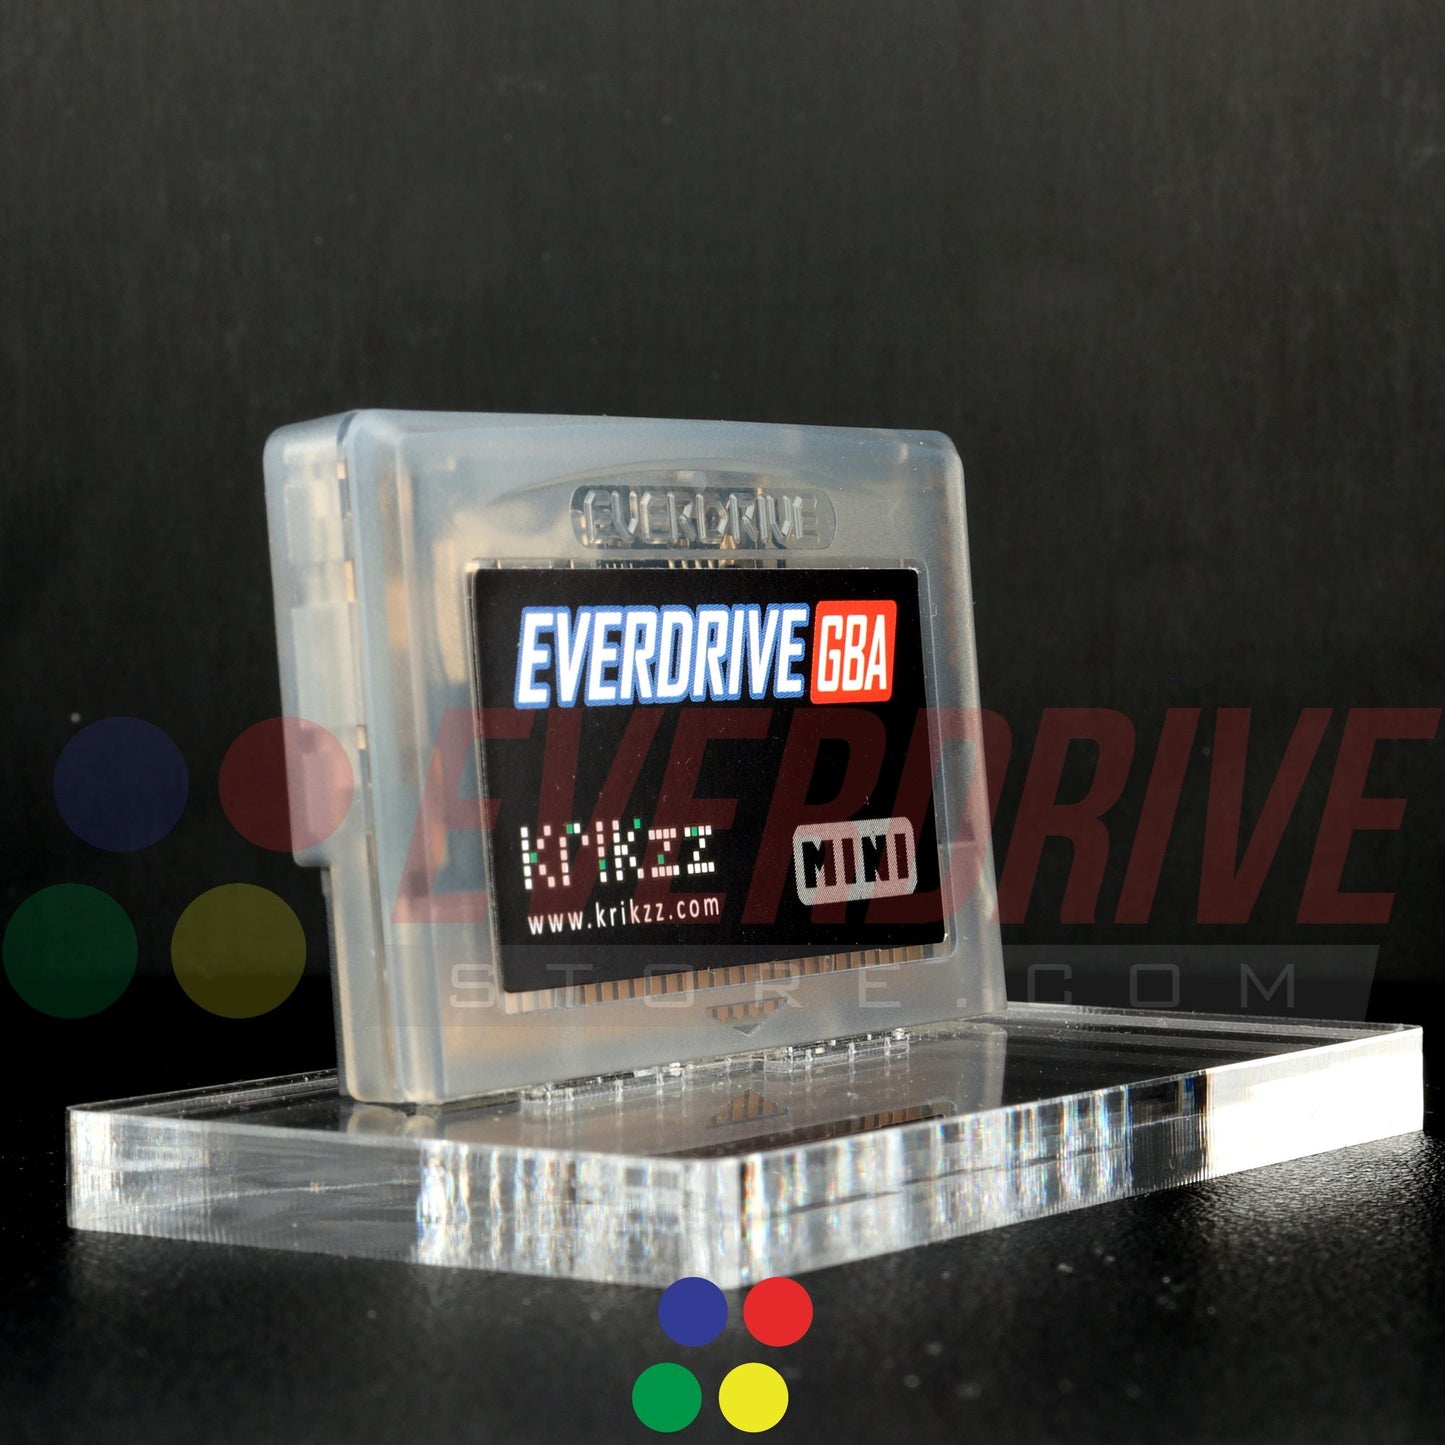 Everdrive GBA Mini - Frosted Black